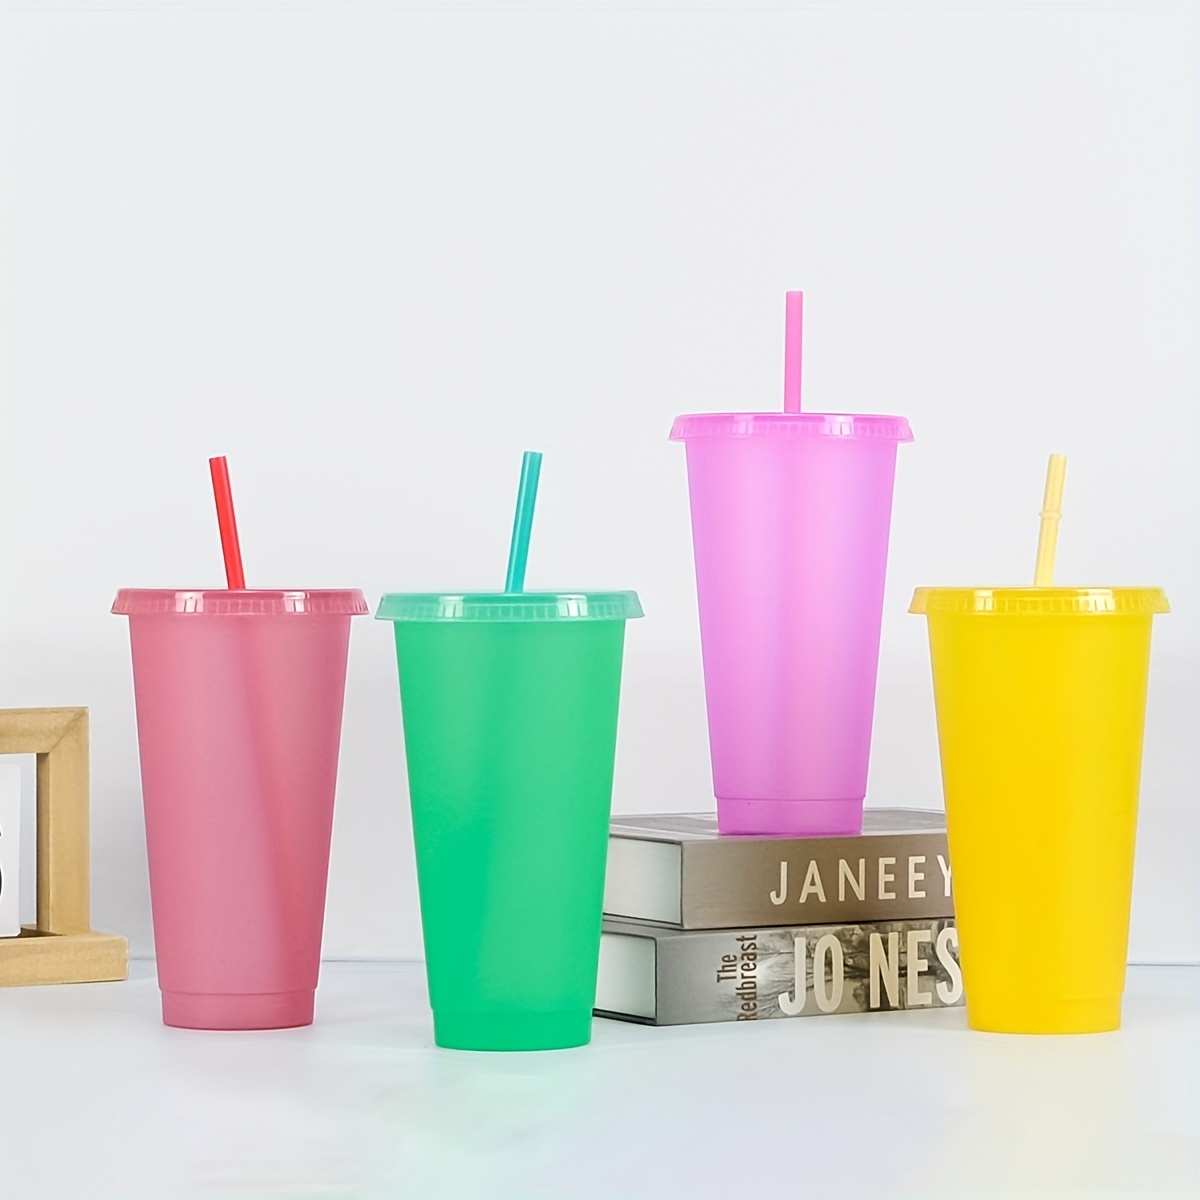 Chainplus Color Changing Cups, 24oz-5Pcs Reusable Colored Acrylic Cups with Lids and Straws |Matte Plastic Bulk Tumblers | Plastic Tumblers with Lids